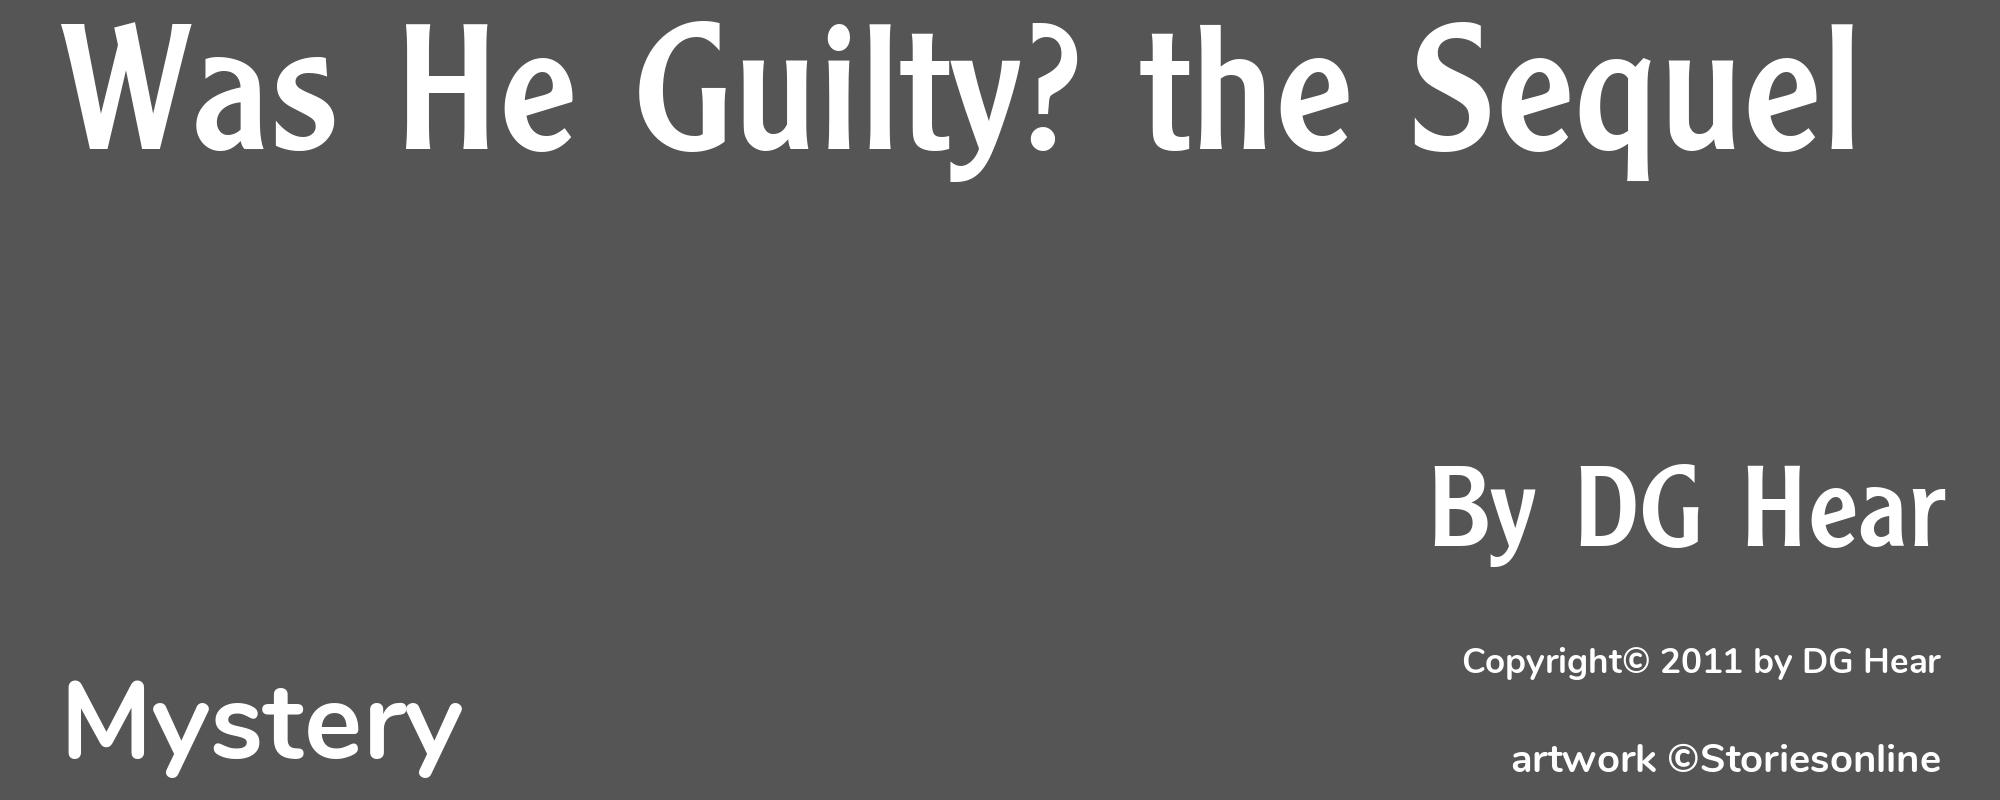 Was He Guilty? the Sequel - Cover